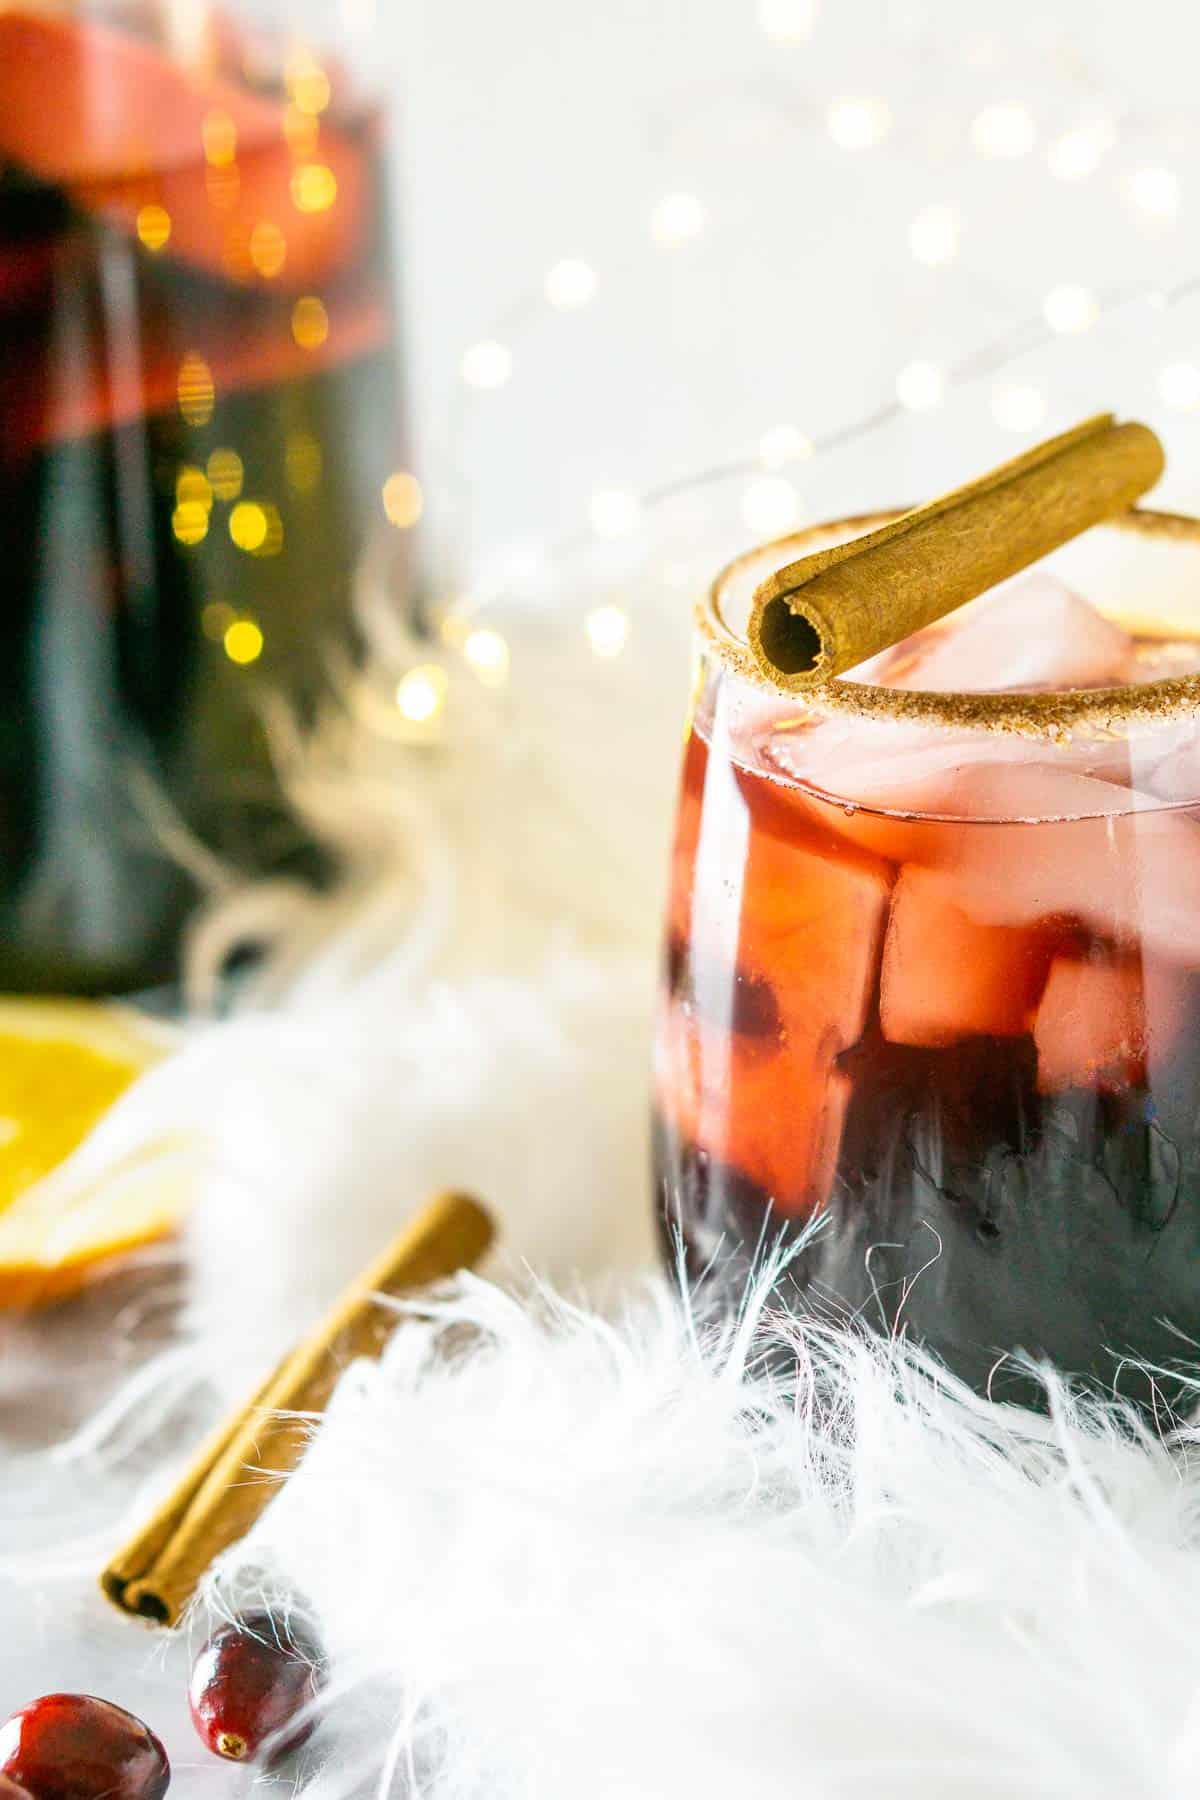 A glass of holiday sangria with a cinnamon stick garnish on a white feathery piece of fabric with a pitcher and twinkling lights in the background.